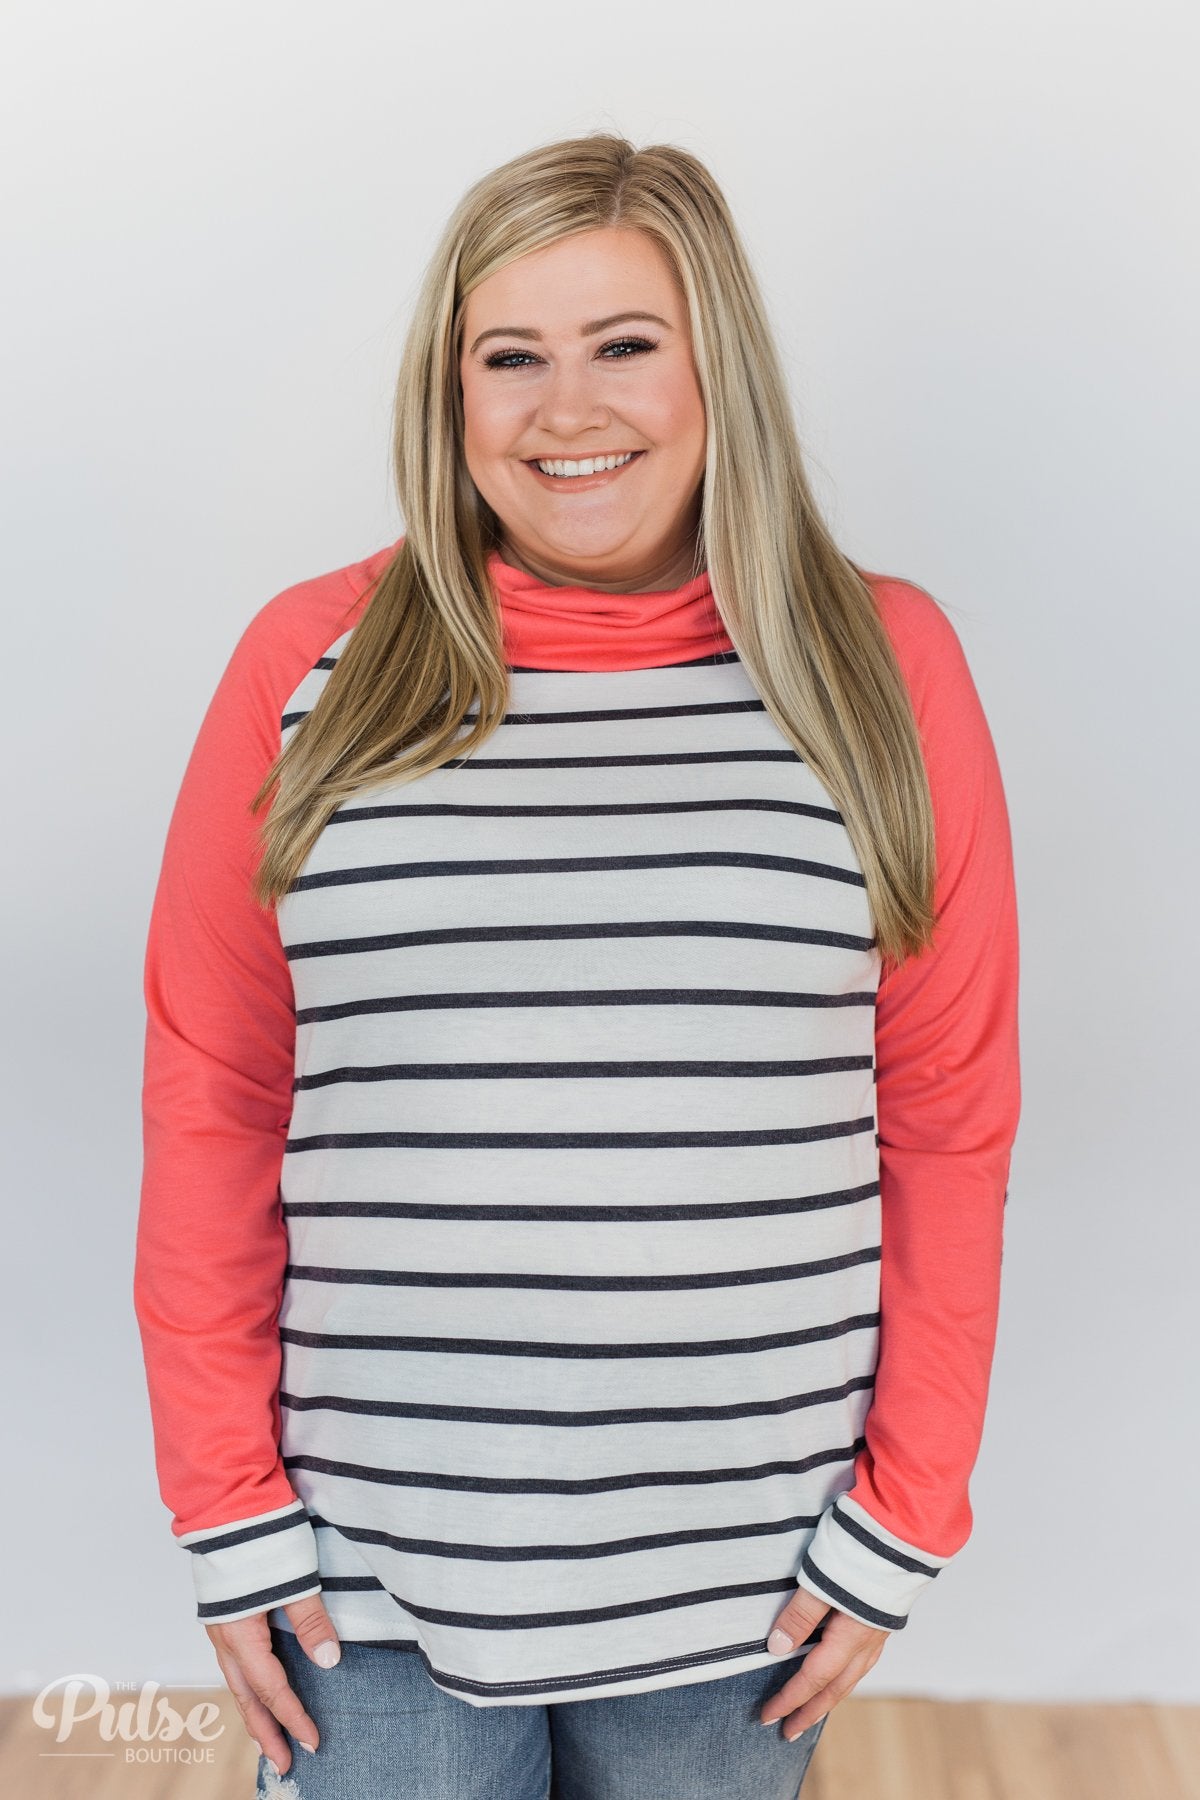 Perfect Match Striped Elbow Patch Cowl Neck- Coral